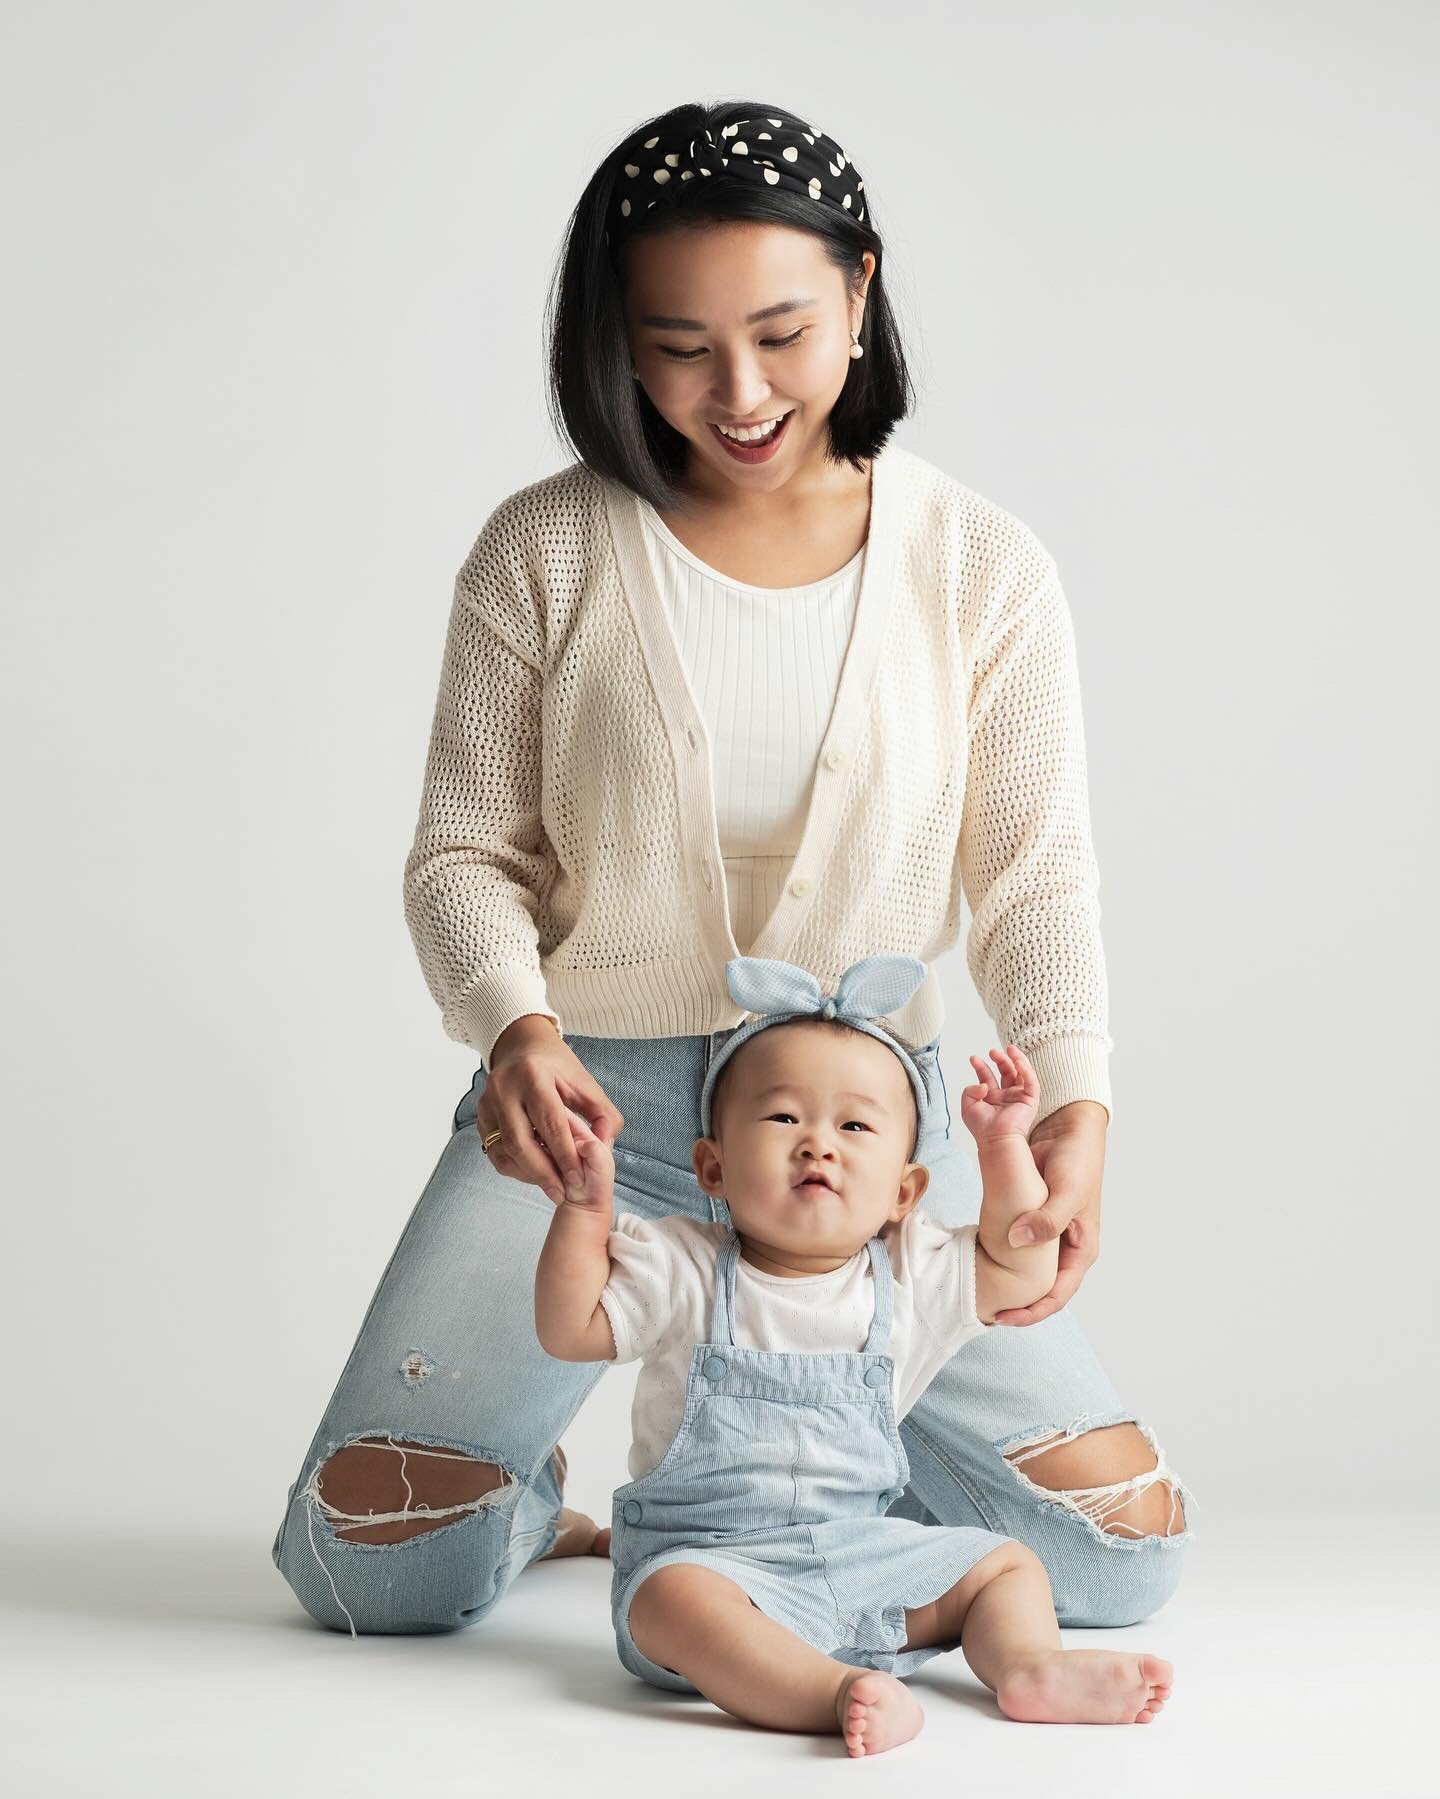 They grow up so fast ... capture all the photos you can when you can !
😍📸 #BabyLove 

Book us now !
Lets create memories

#kidsphotographer #kidsphotographysingapore